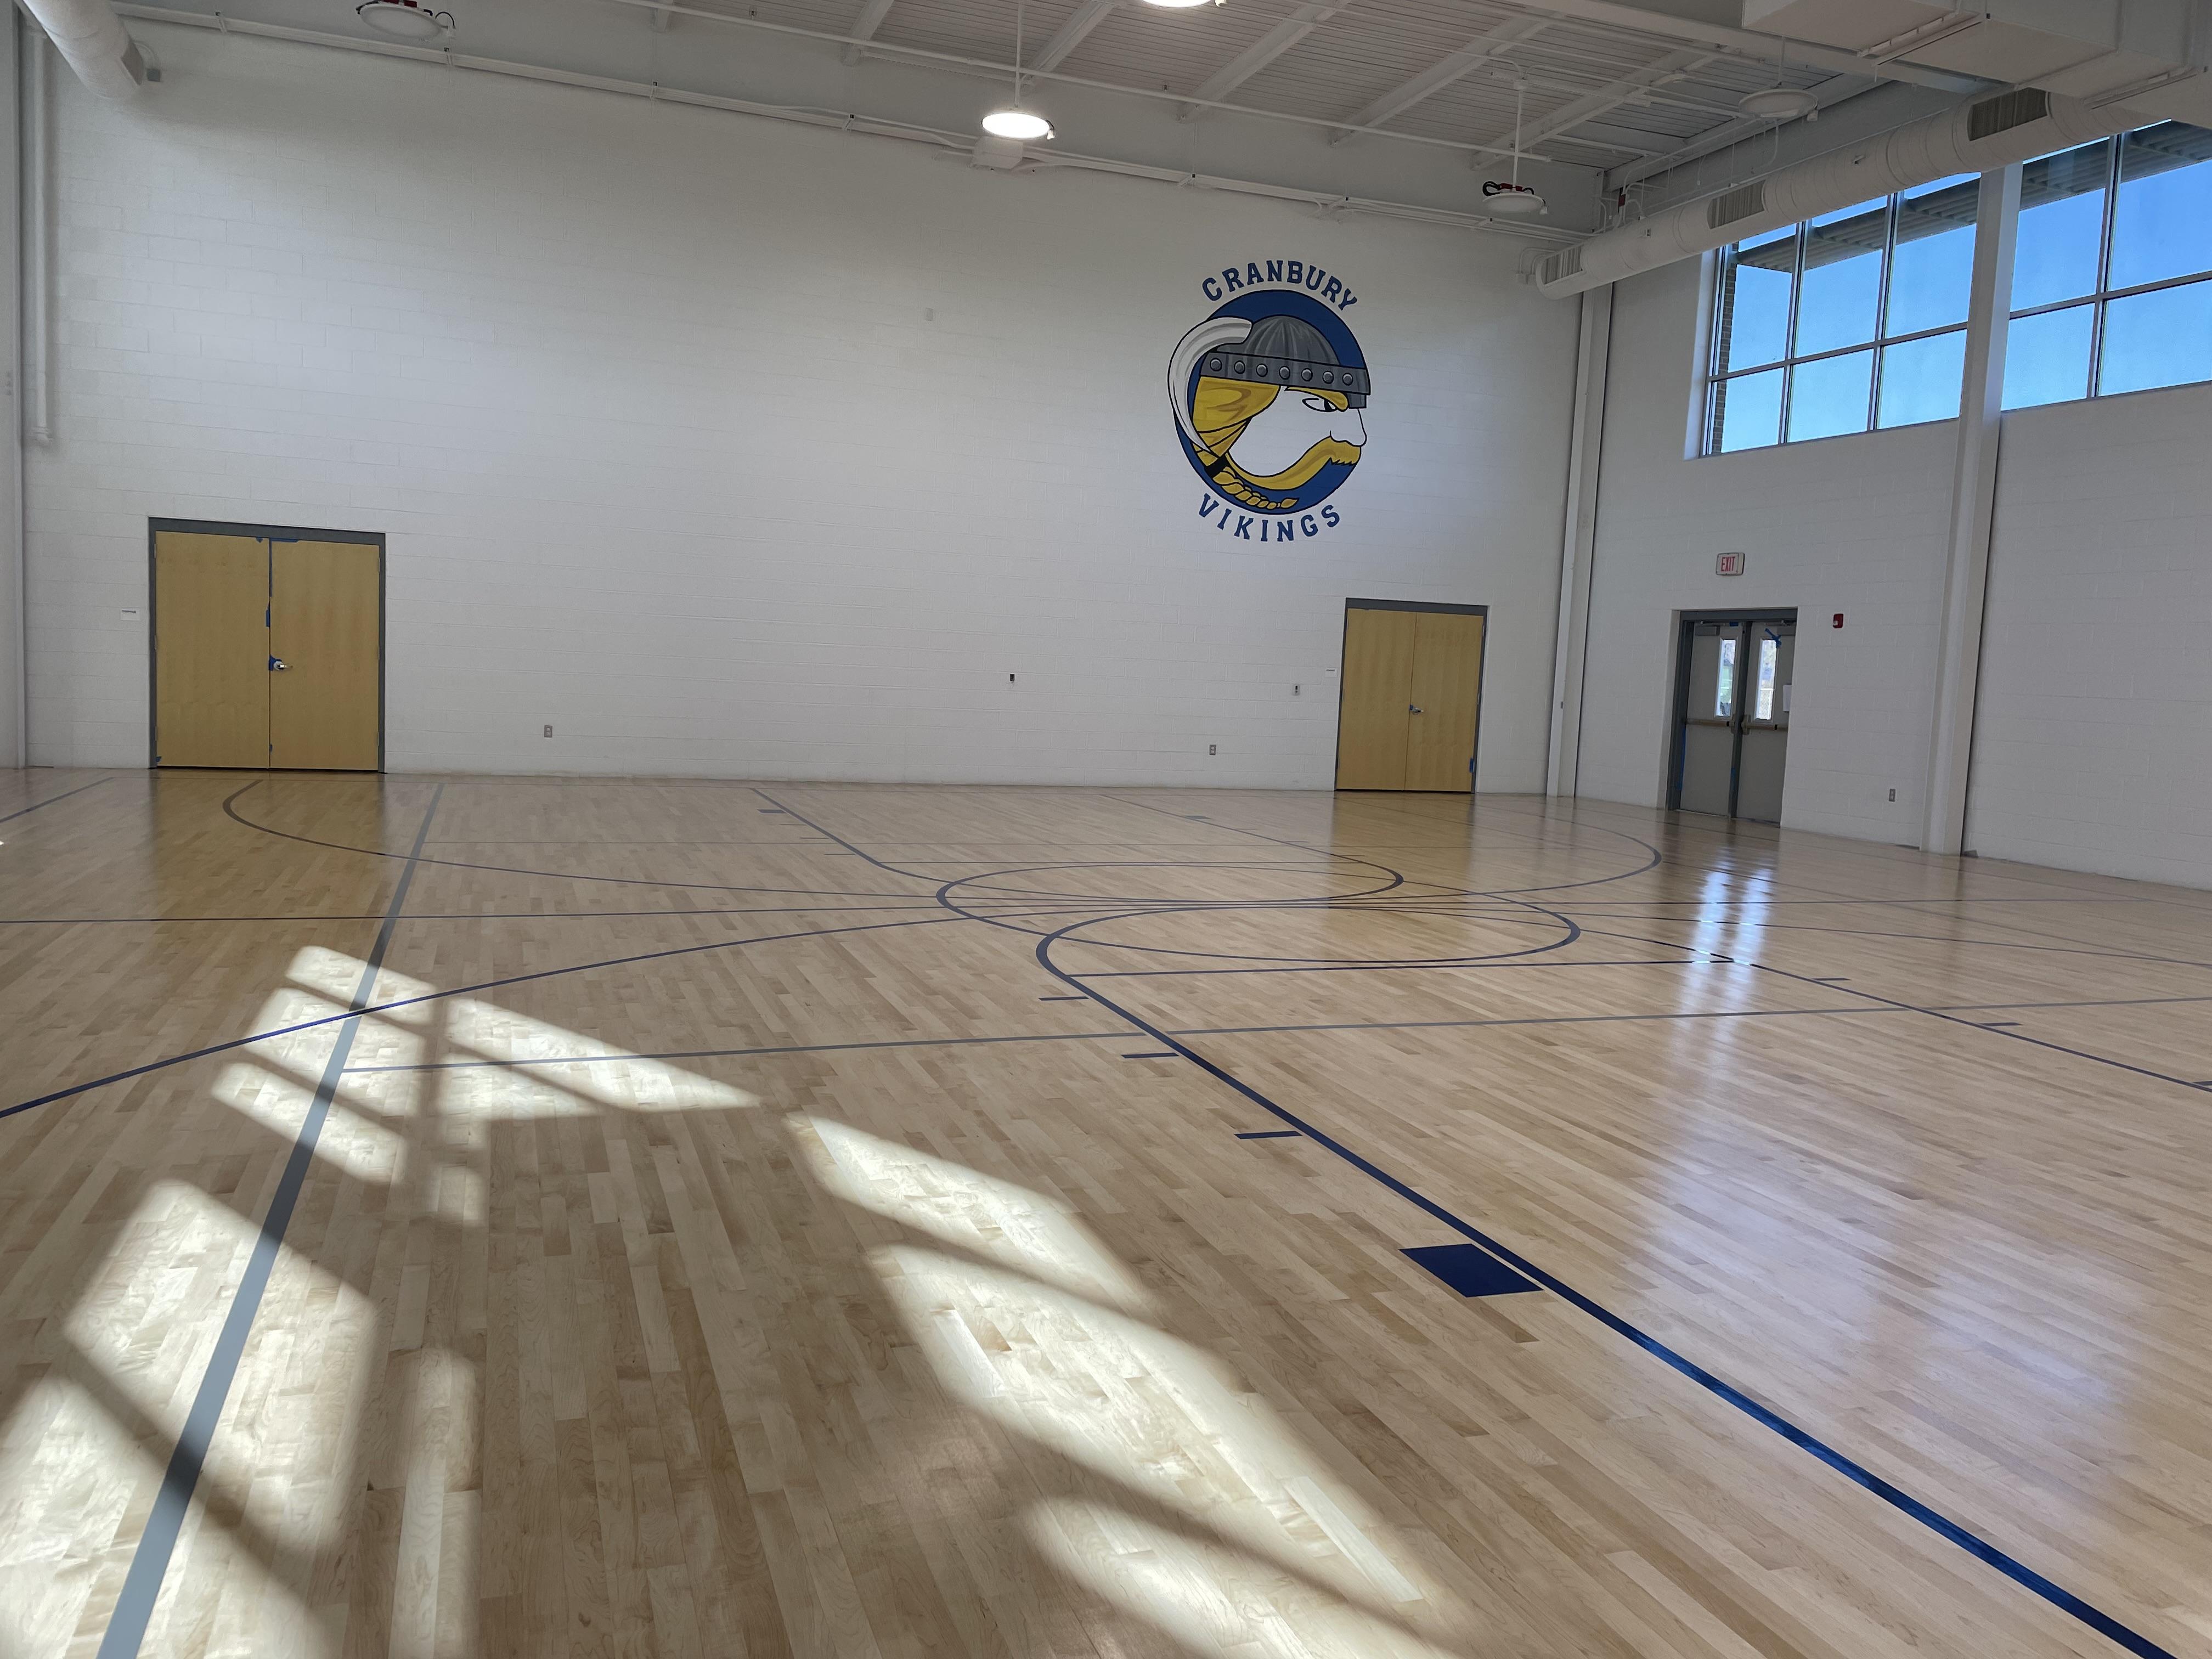 Auxiliary Gym - internal pic - floor layed, painted